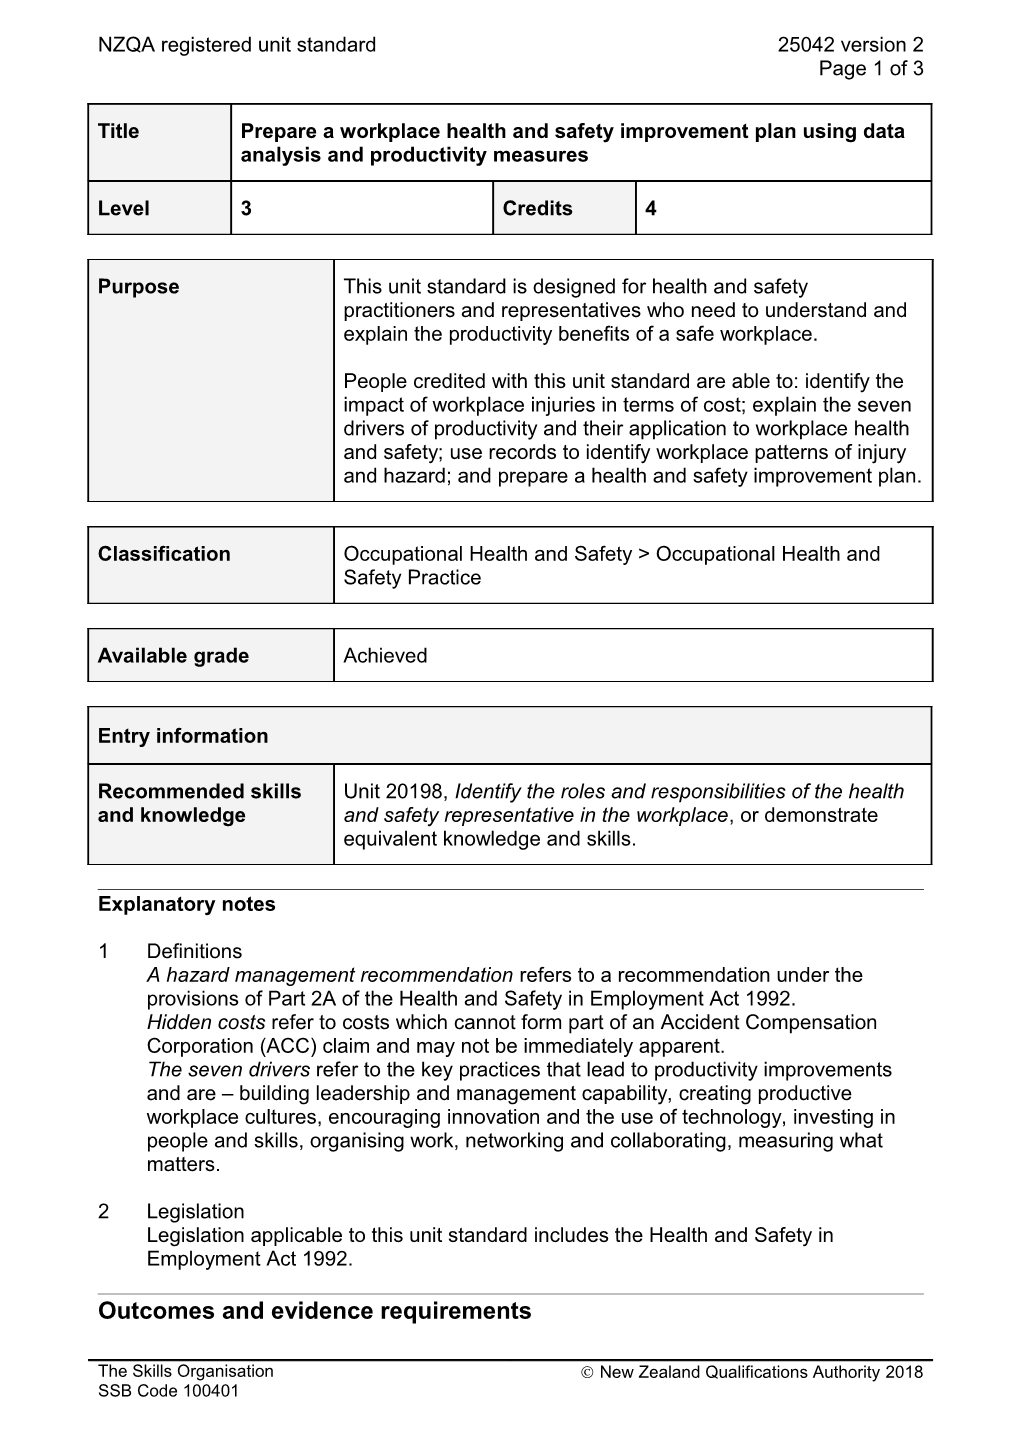 25042 Prepare a Workplace Health and Safety Improvement Plan Using Data Analysis And